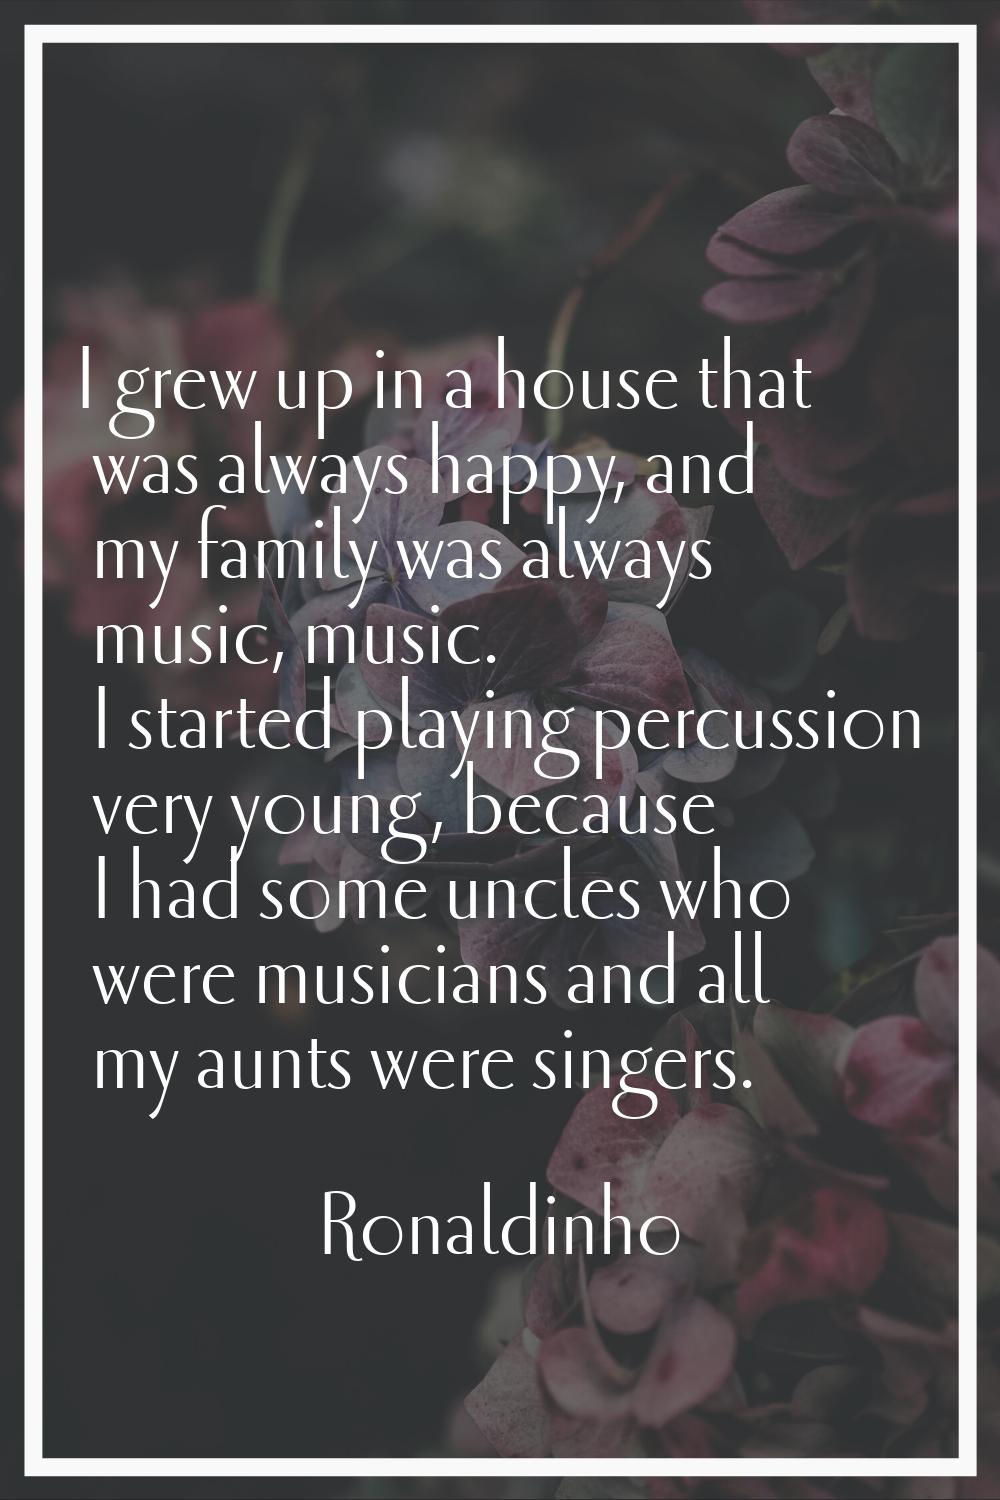 I grew up in a house that was always happy, and my family was always music, music. I started playin